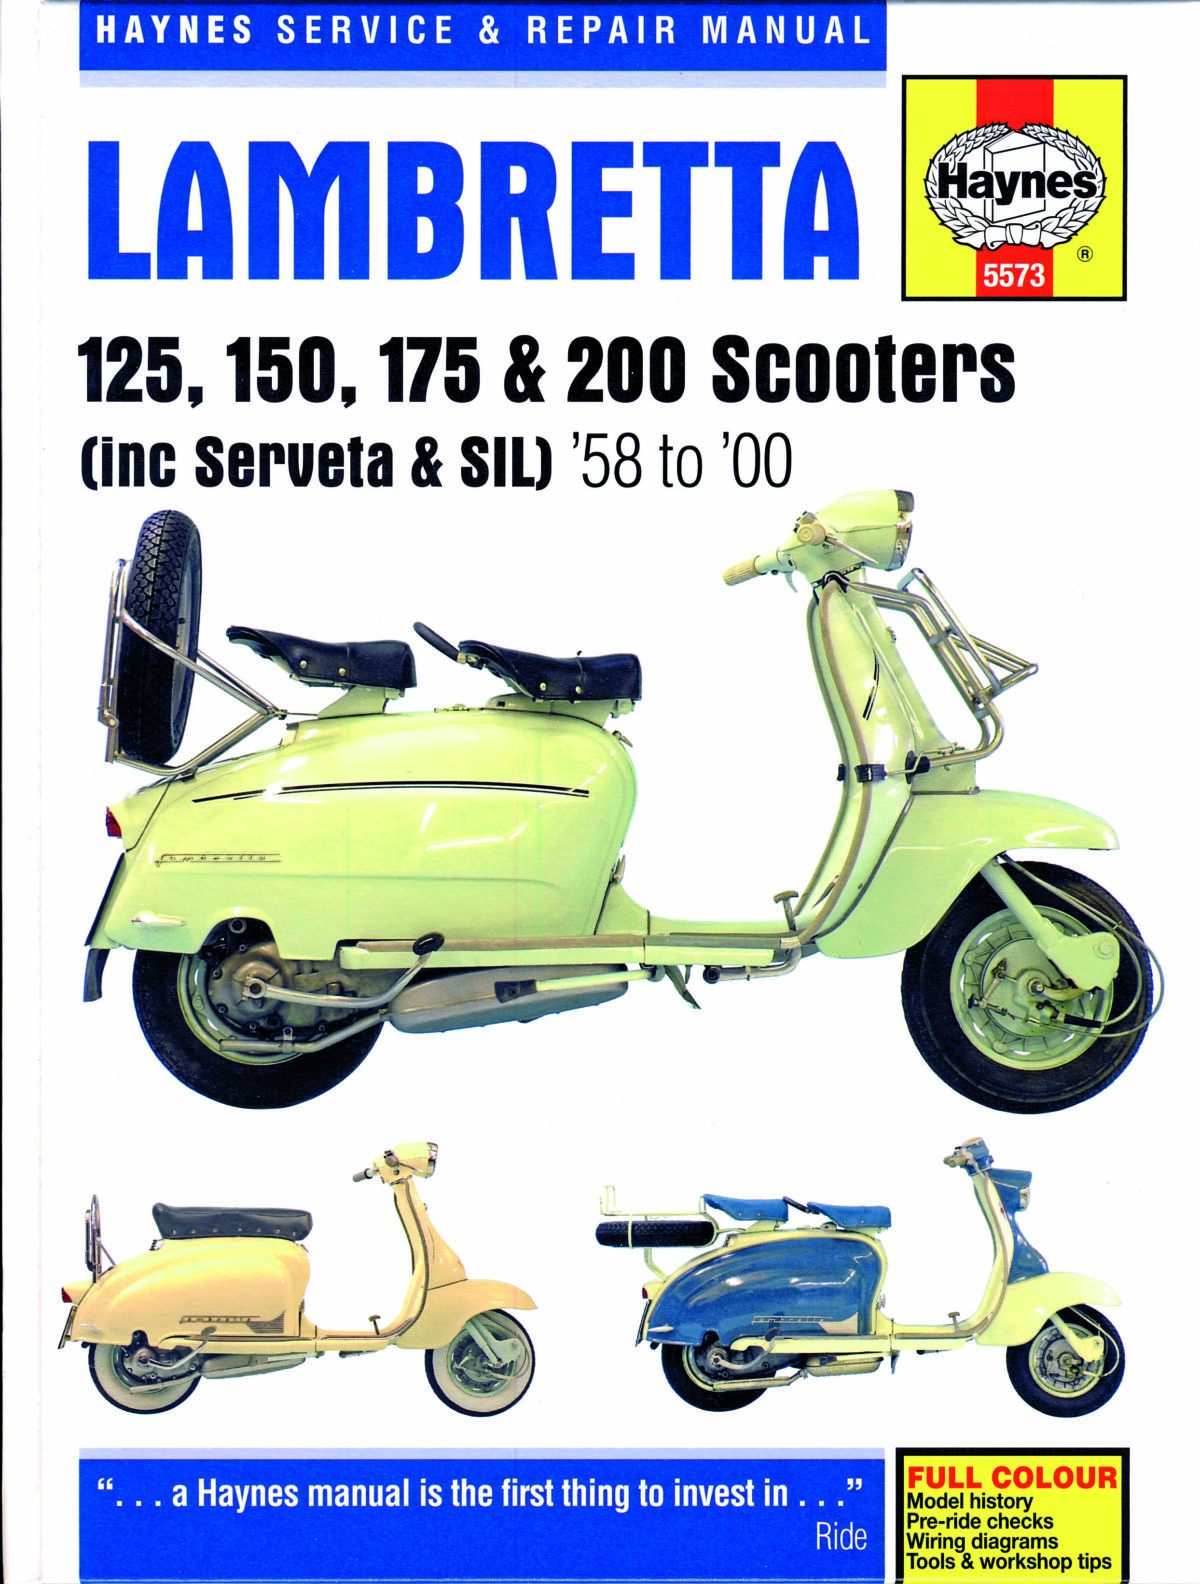 Manchuriet Udgående solsikke Haynes Service and Repair Manual for Lambretta Scooters - Scootering  Magazine